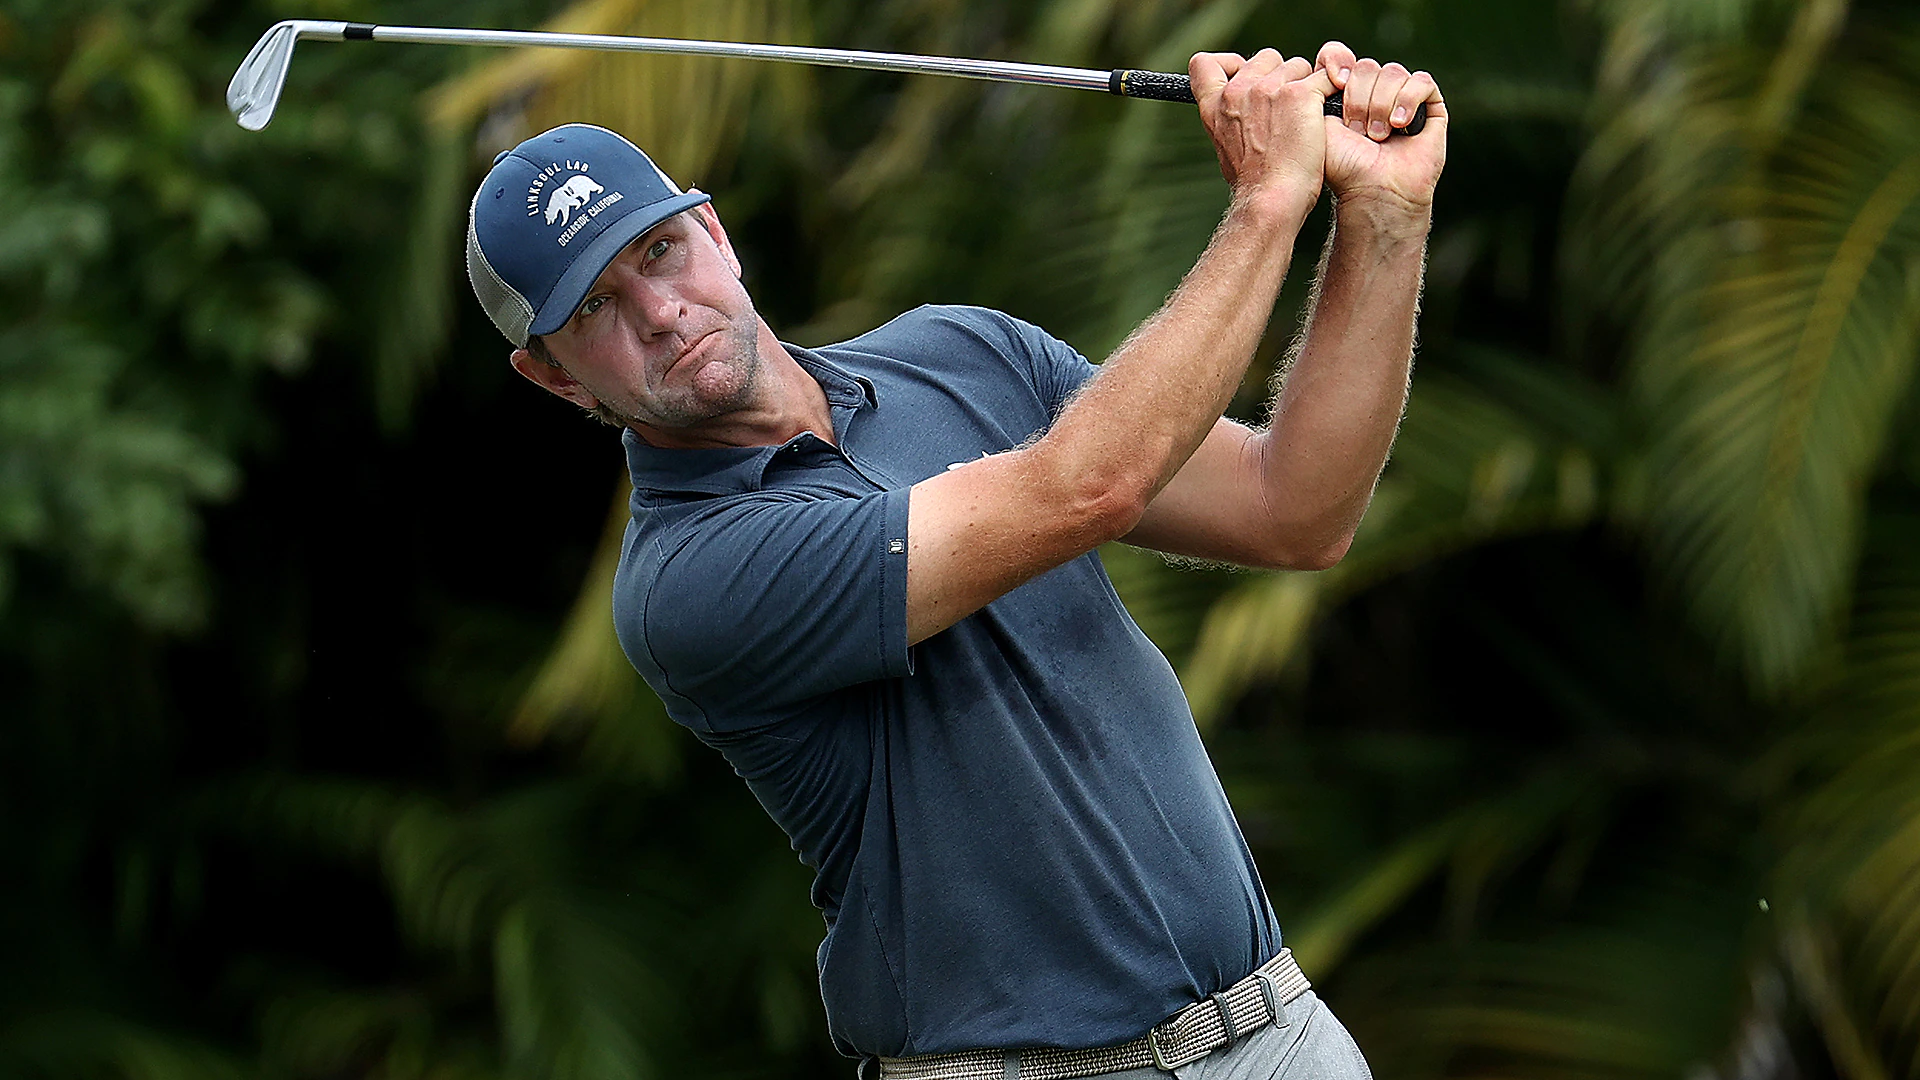 After criticizing ‘reactive’ response, Lucas Glover says Tour’s done ‘hell of a job’